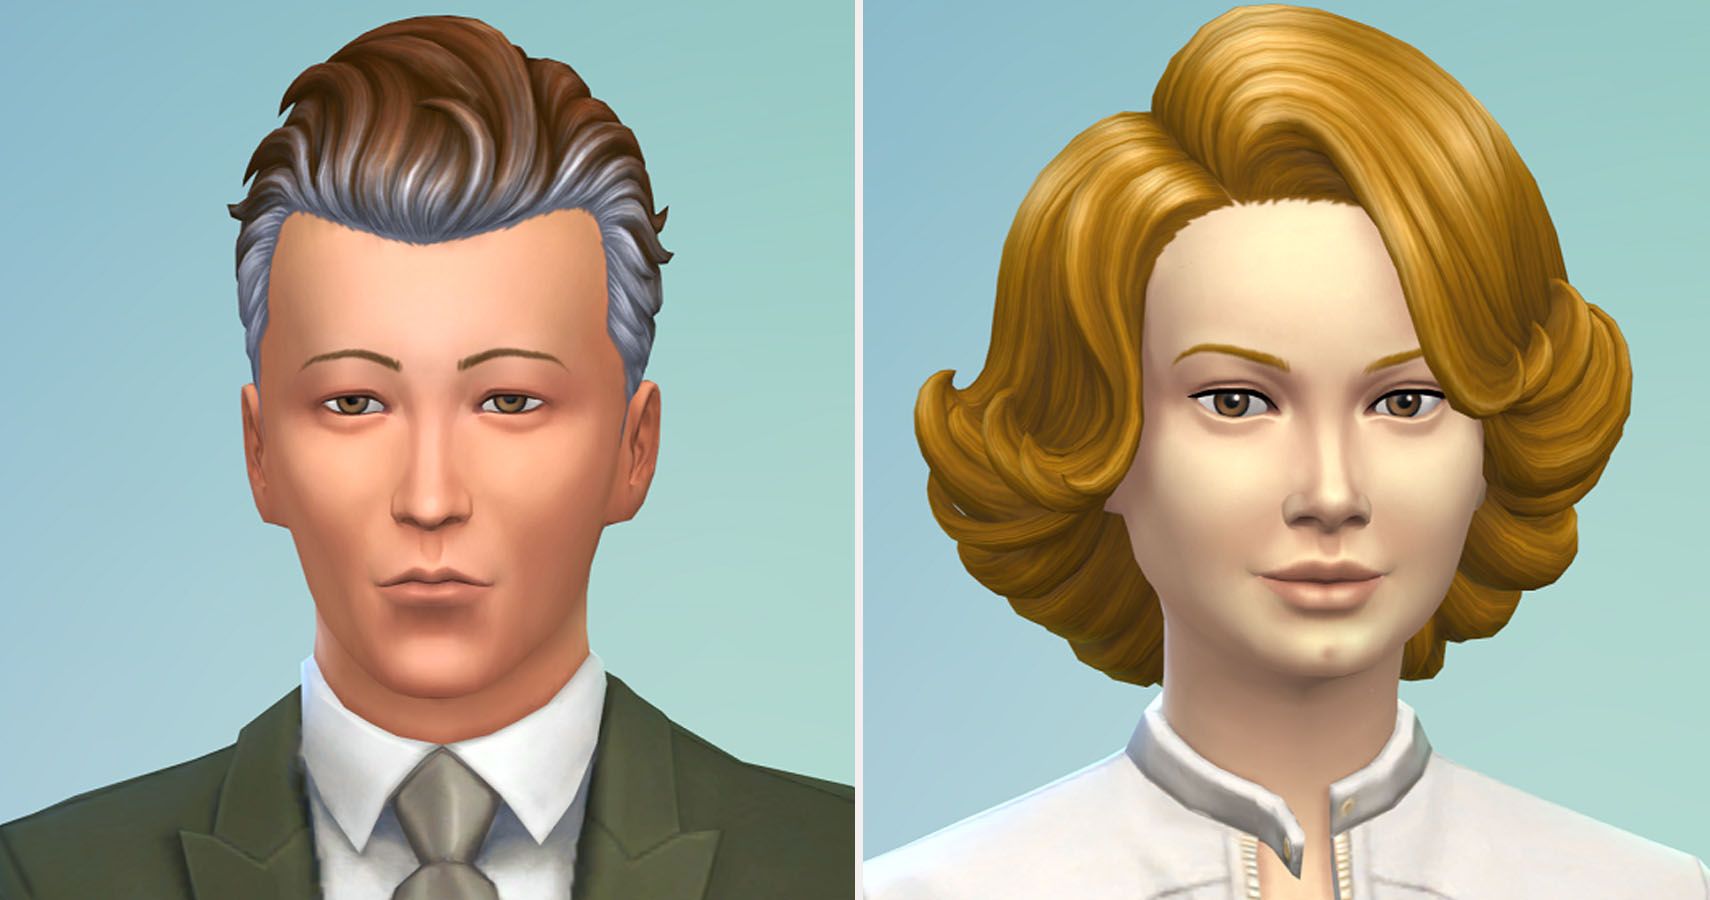 Headshots of two sims in create a sim.